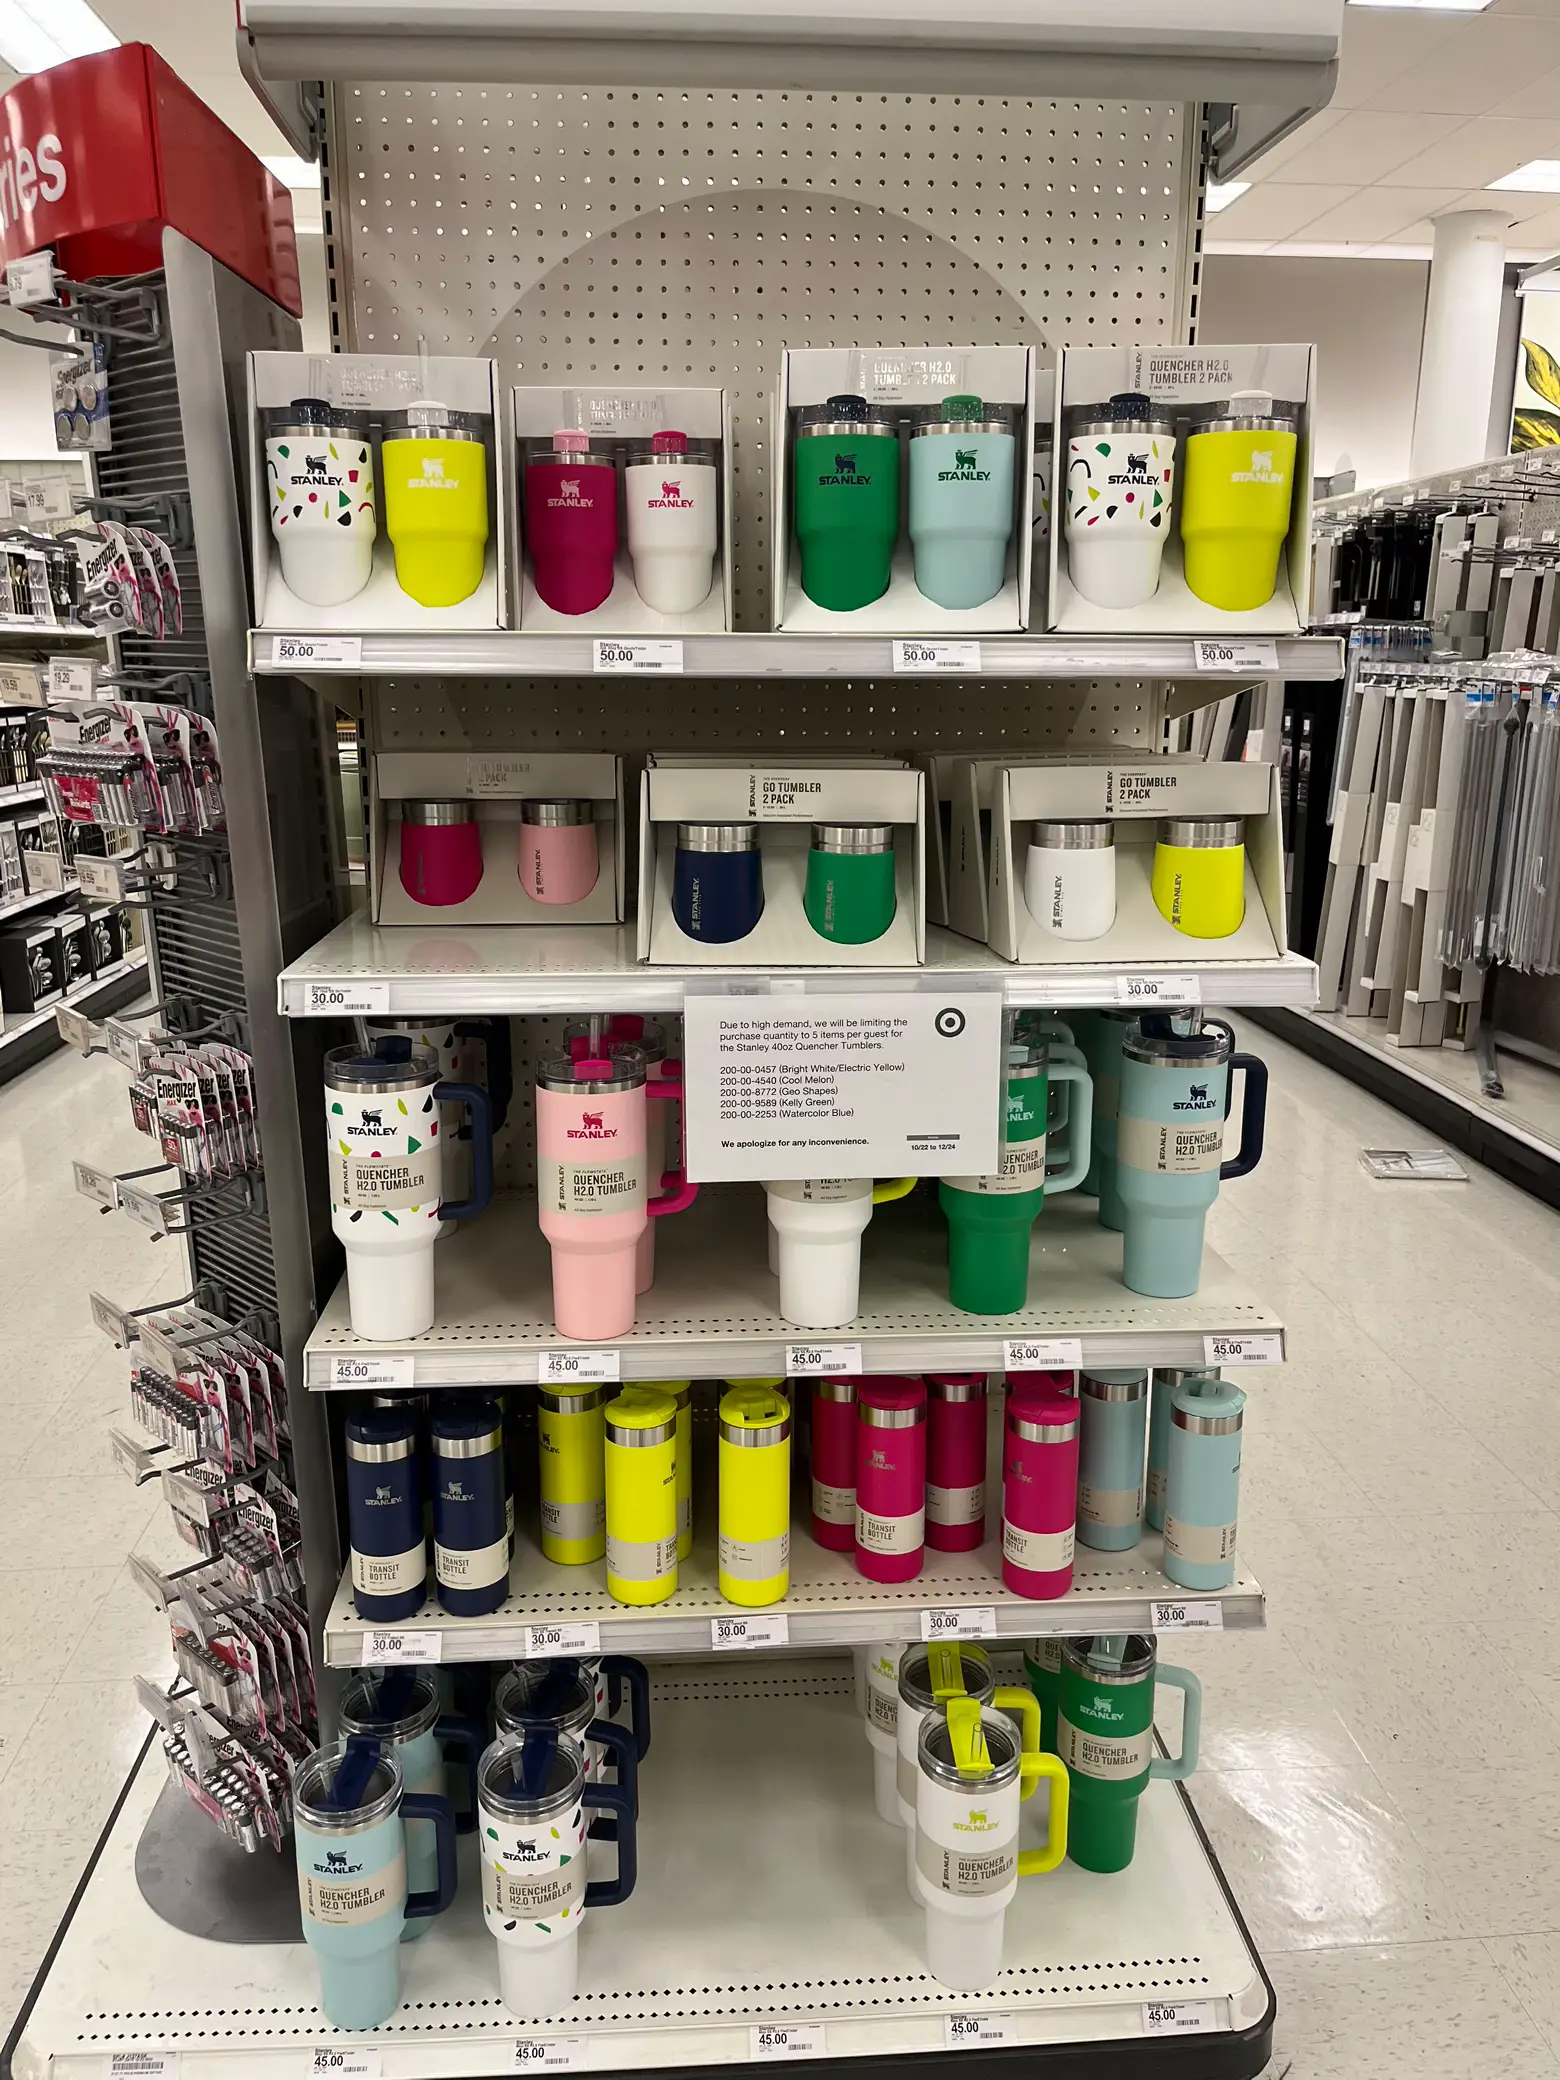 Target Released 6 New Stanley Tumbler Colors